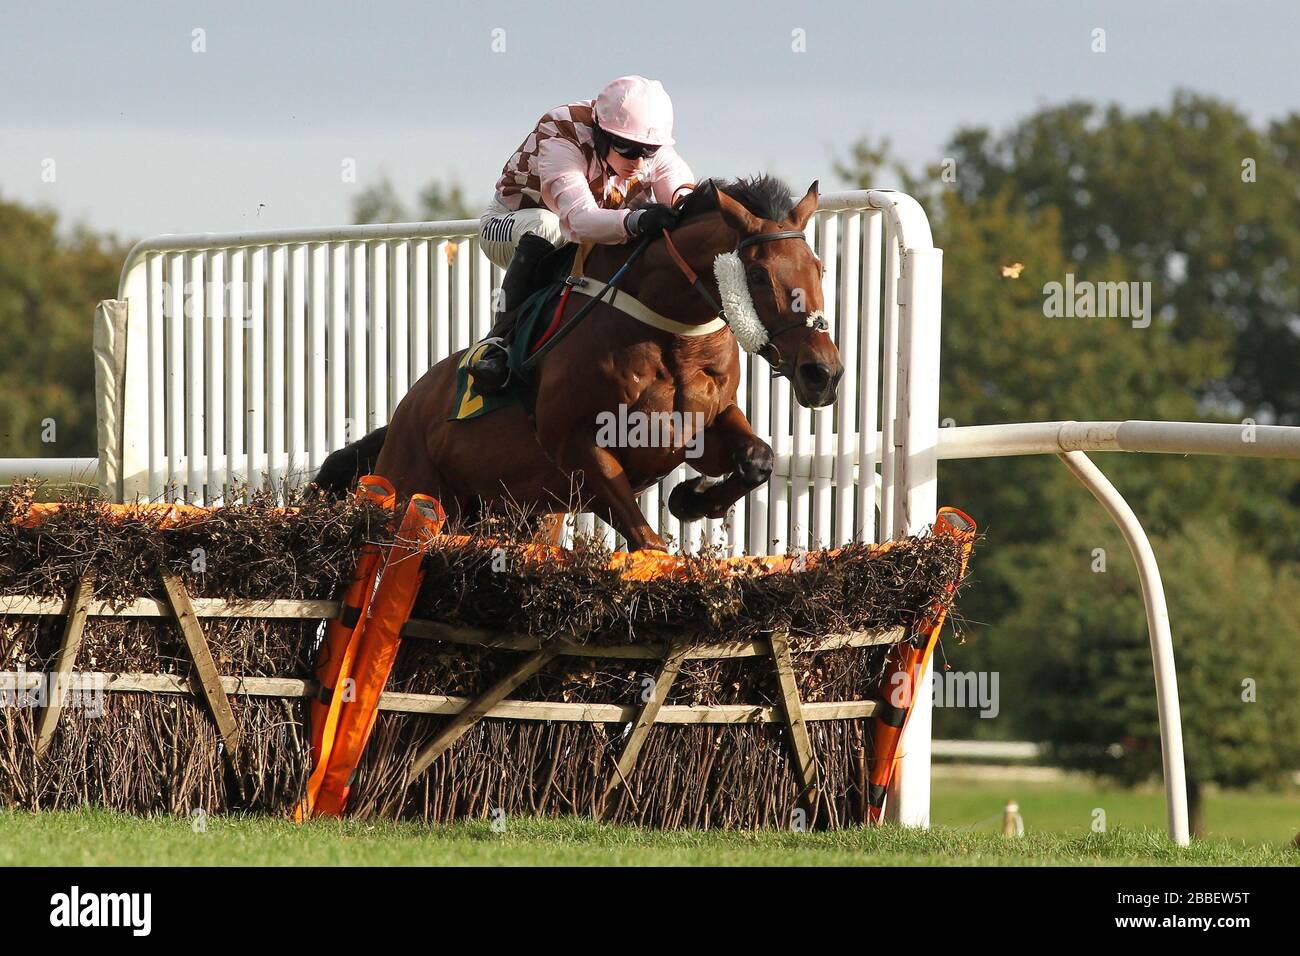 Marodima ridden by Tom O'Brien in jumping action during the Kettle Chips Handicap Hurdle Stock Photo